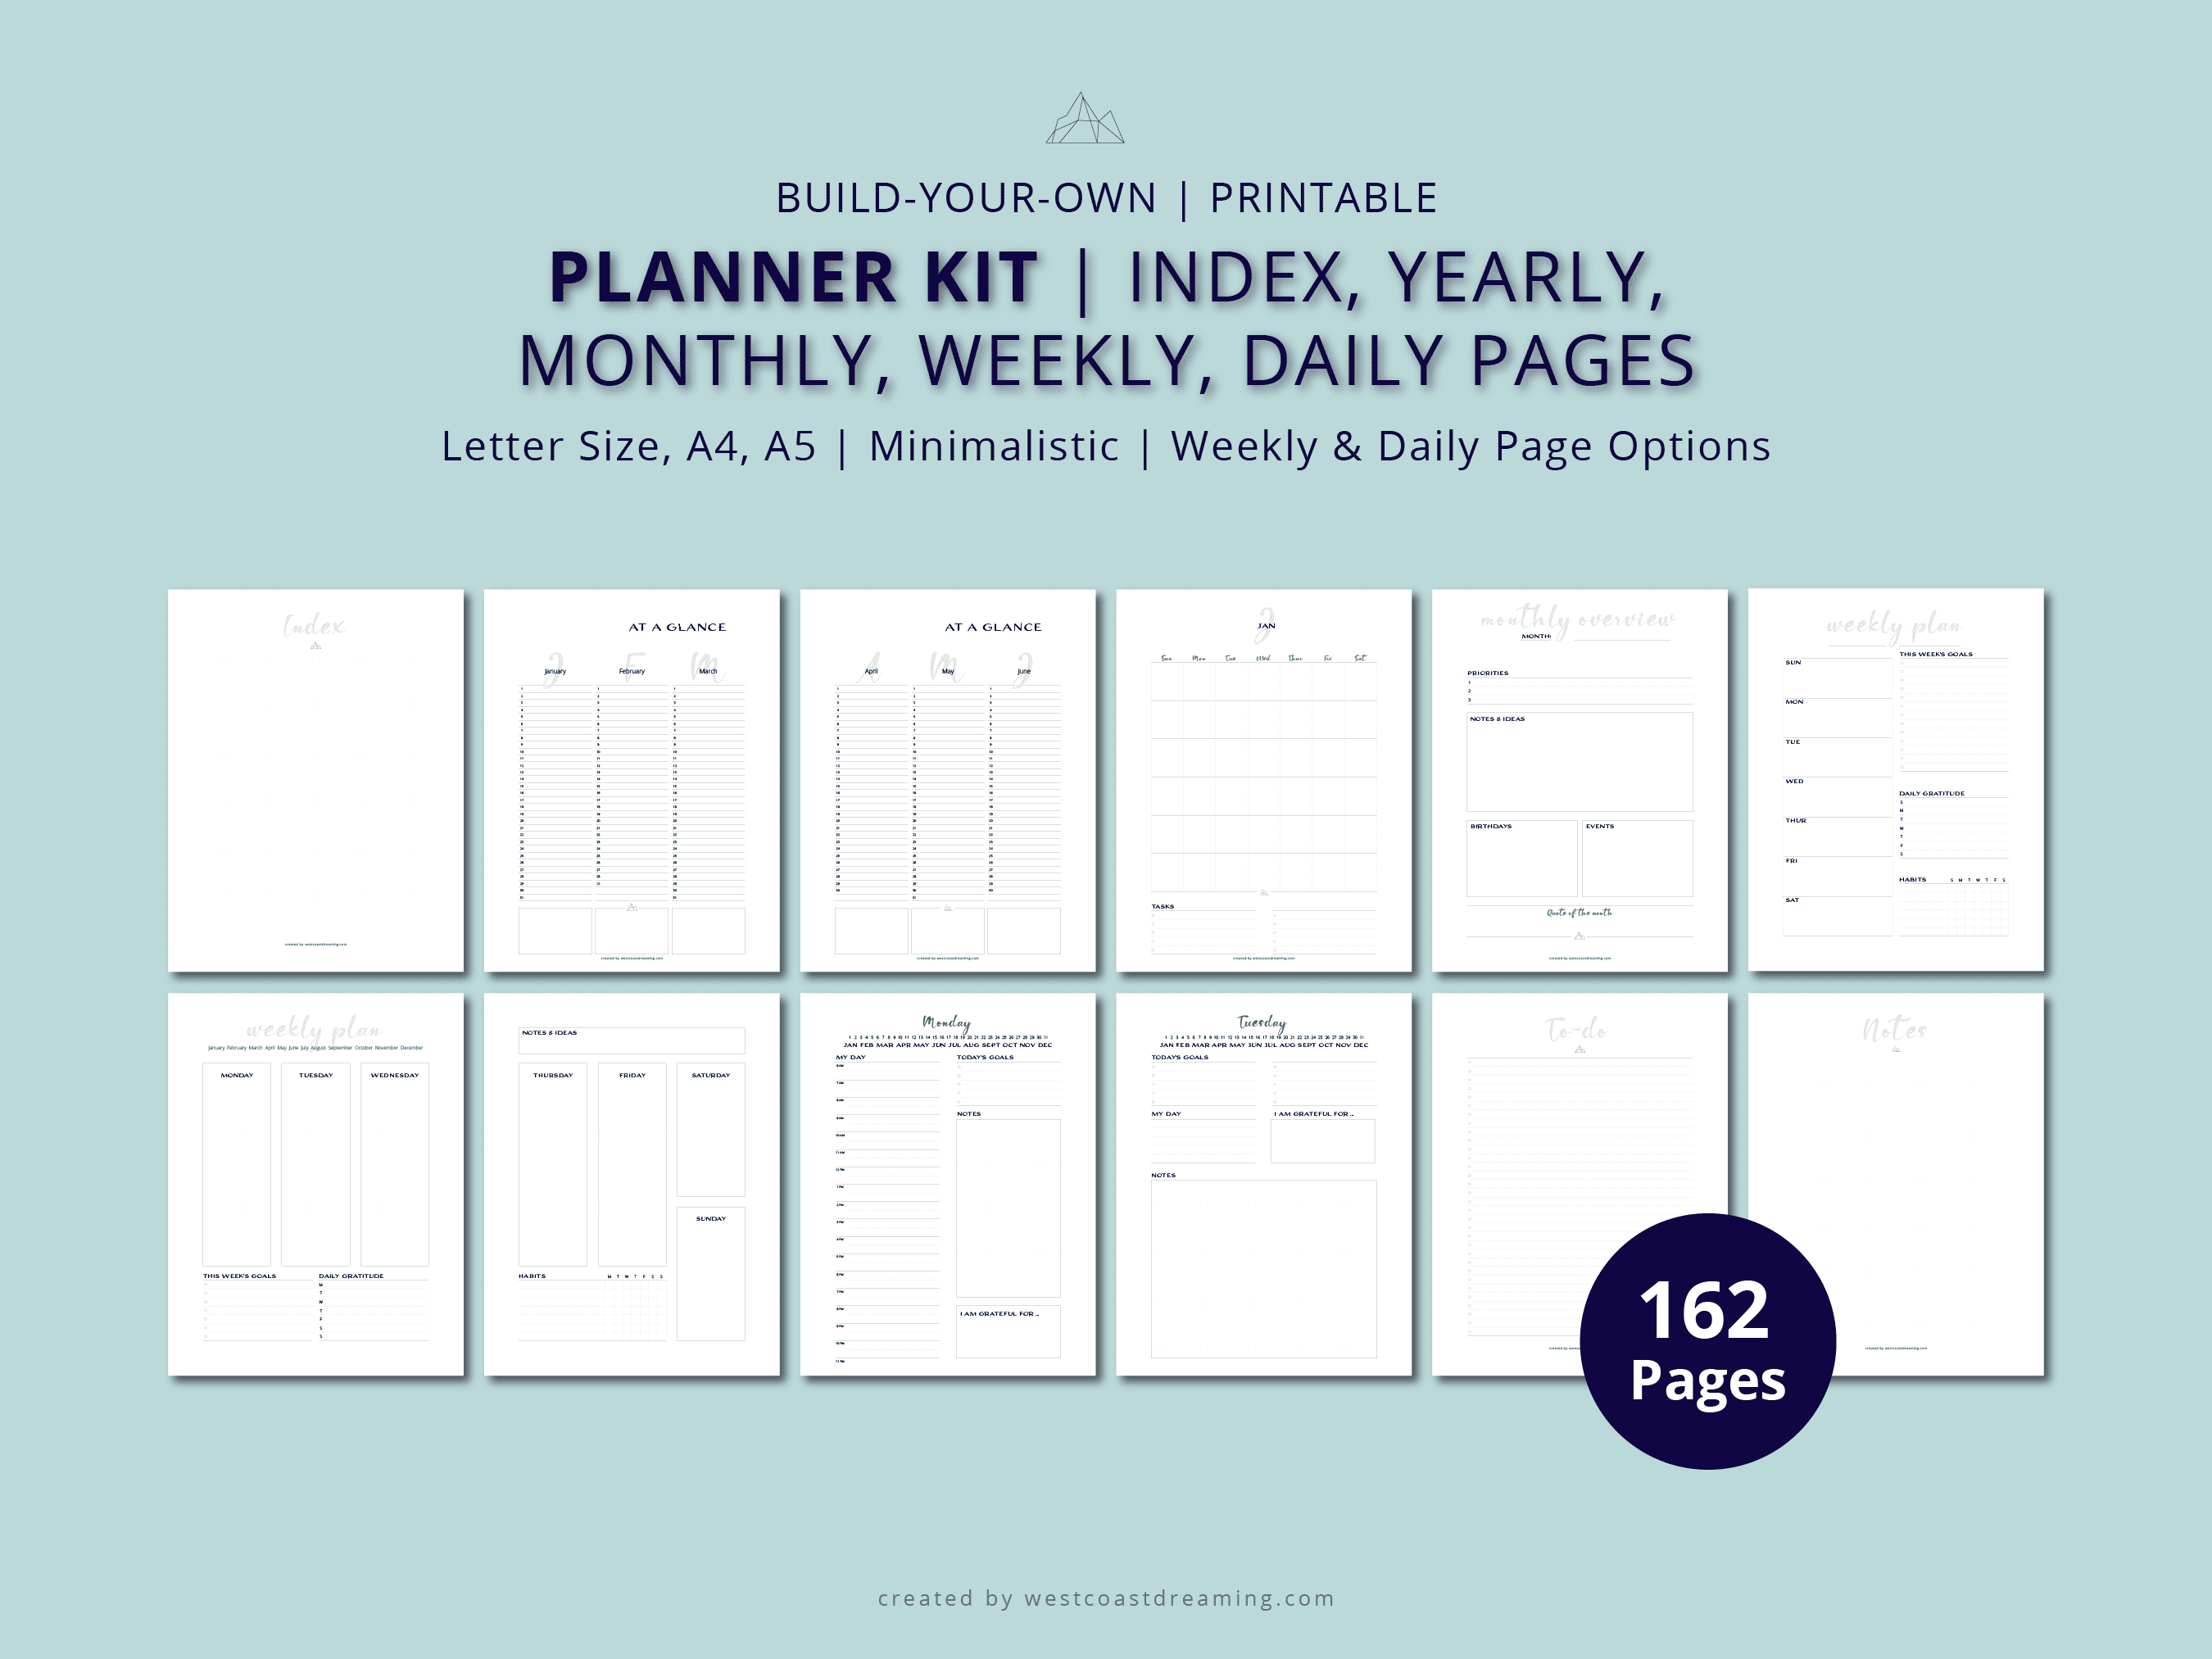 https://westcoastdreaming.com/wp-content/uploads/2022/06/etsy-product-pictures-planner-kit-01-min.png